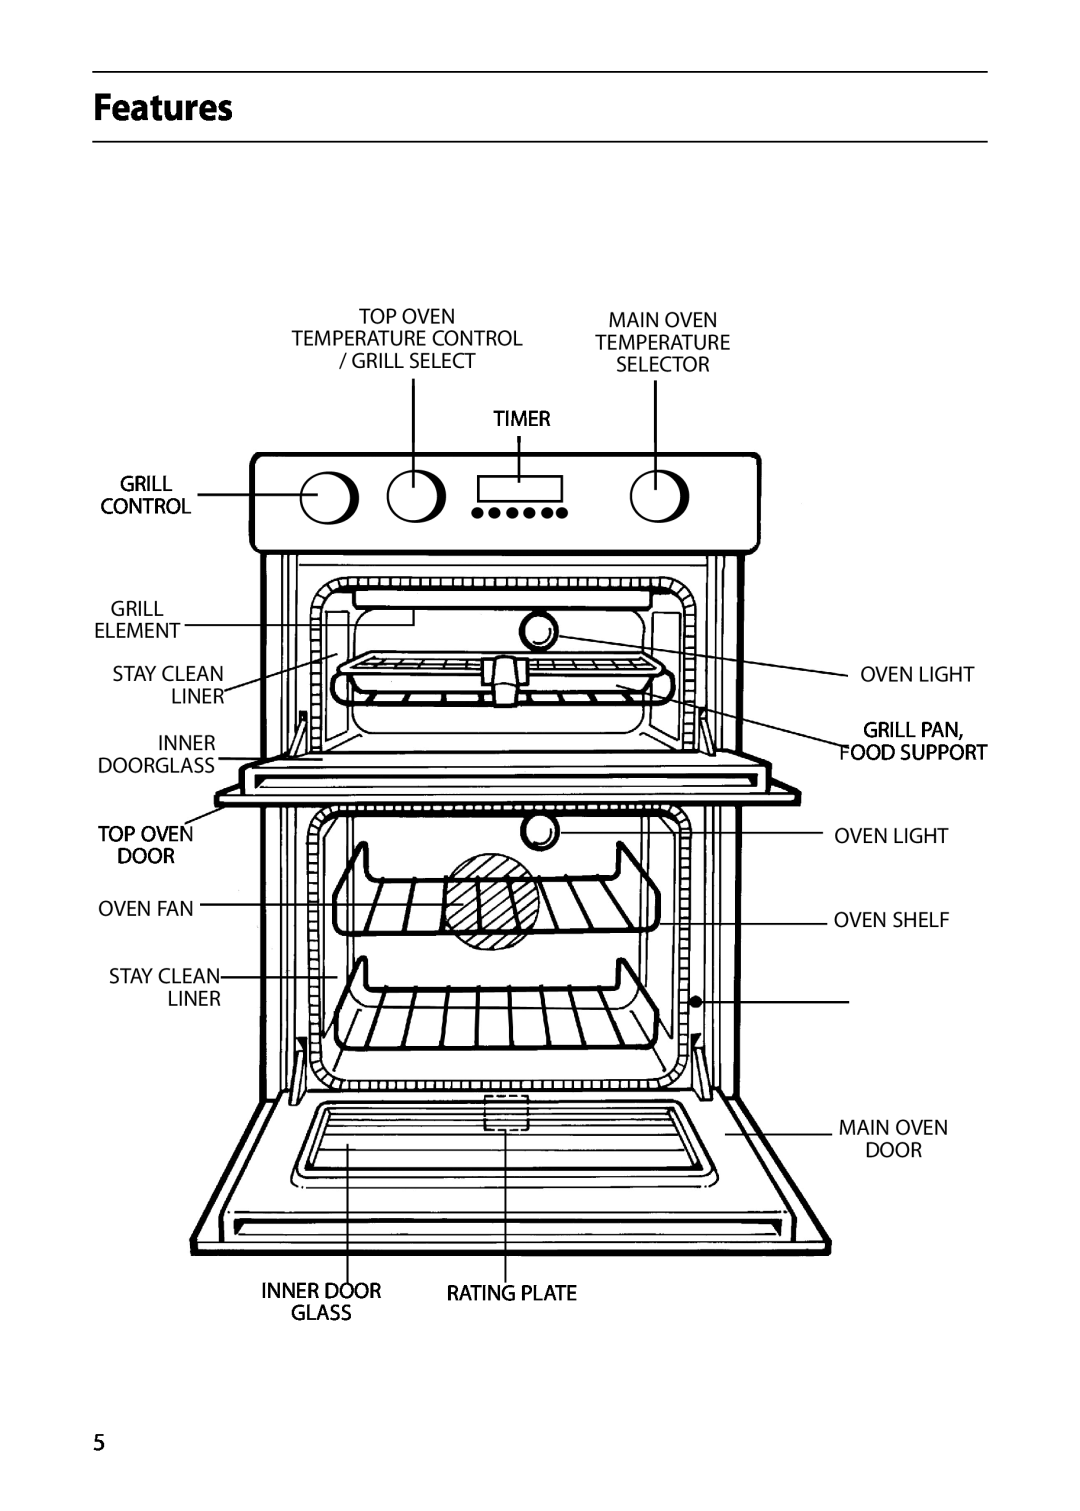 Hotpoint S130E manual Features, Grill Control Grill Element, Top Oven Door Oven Fan, Main Oven Temperature Selector 